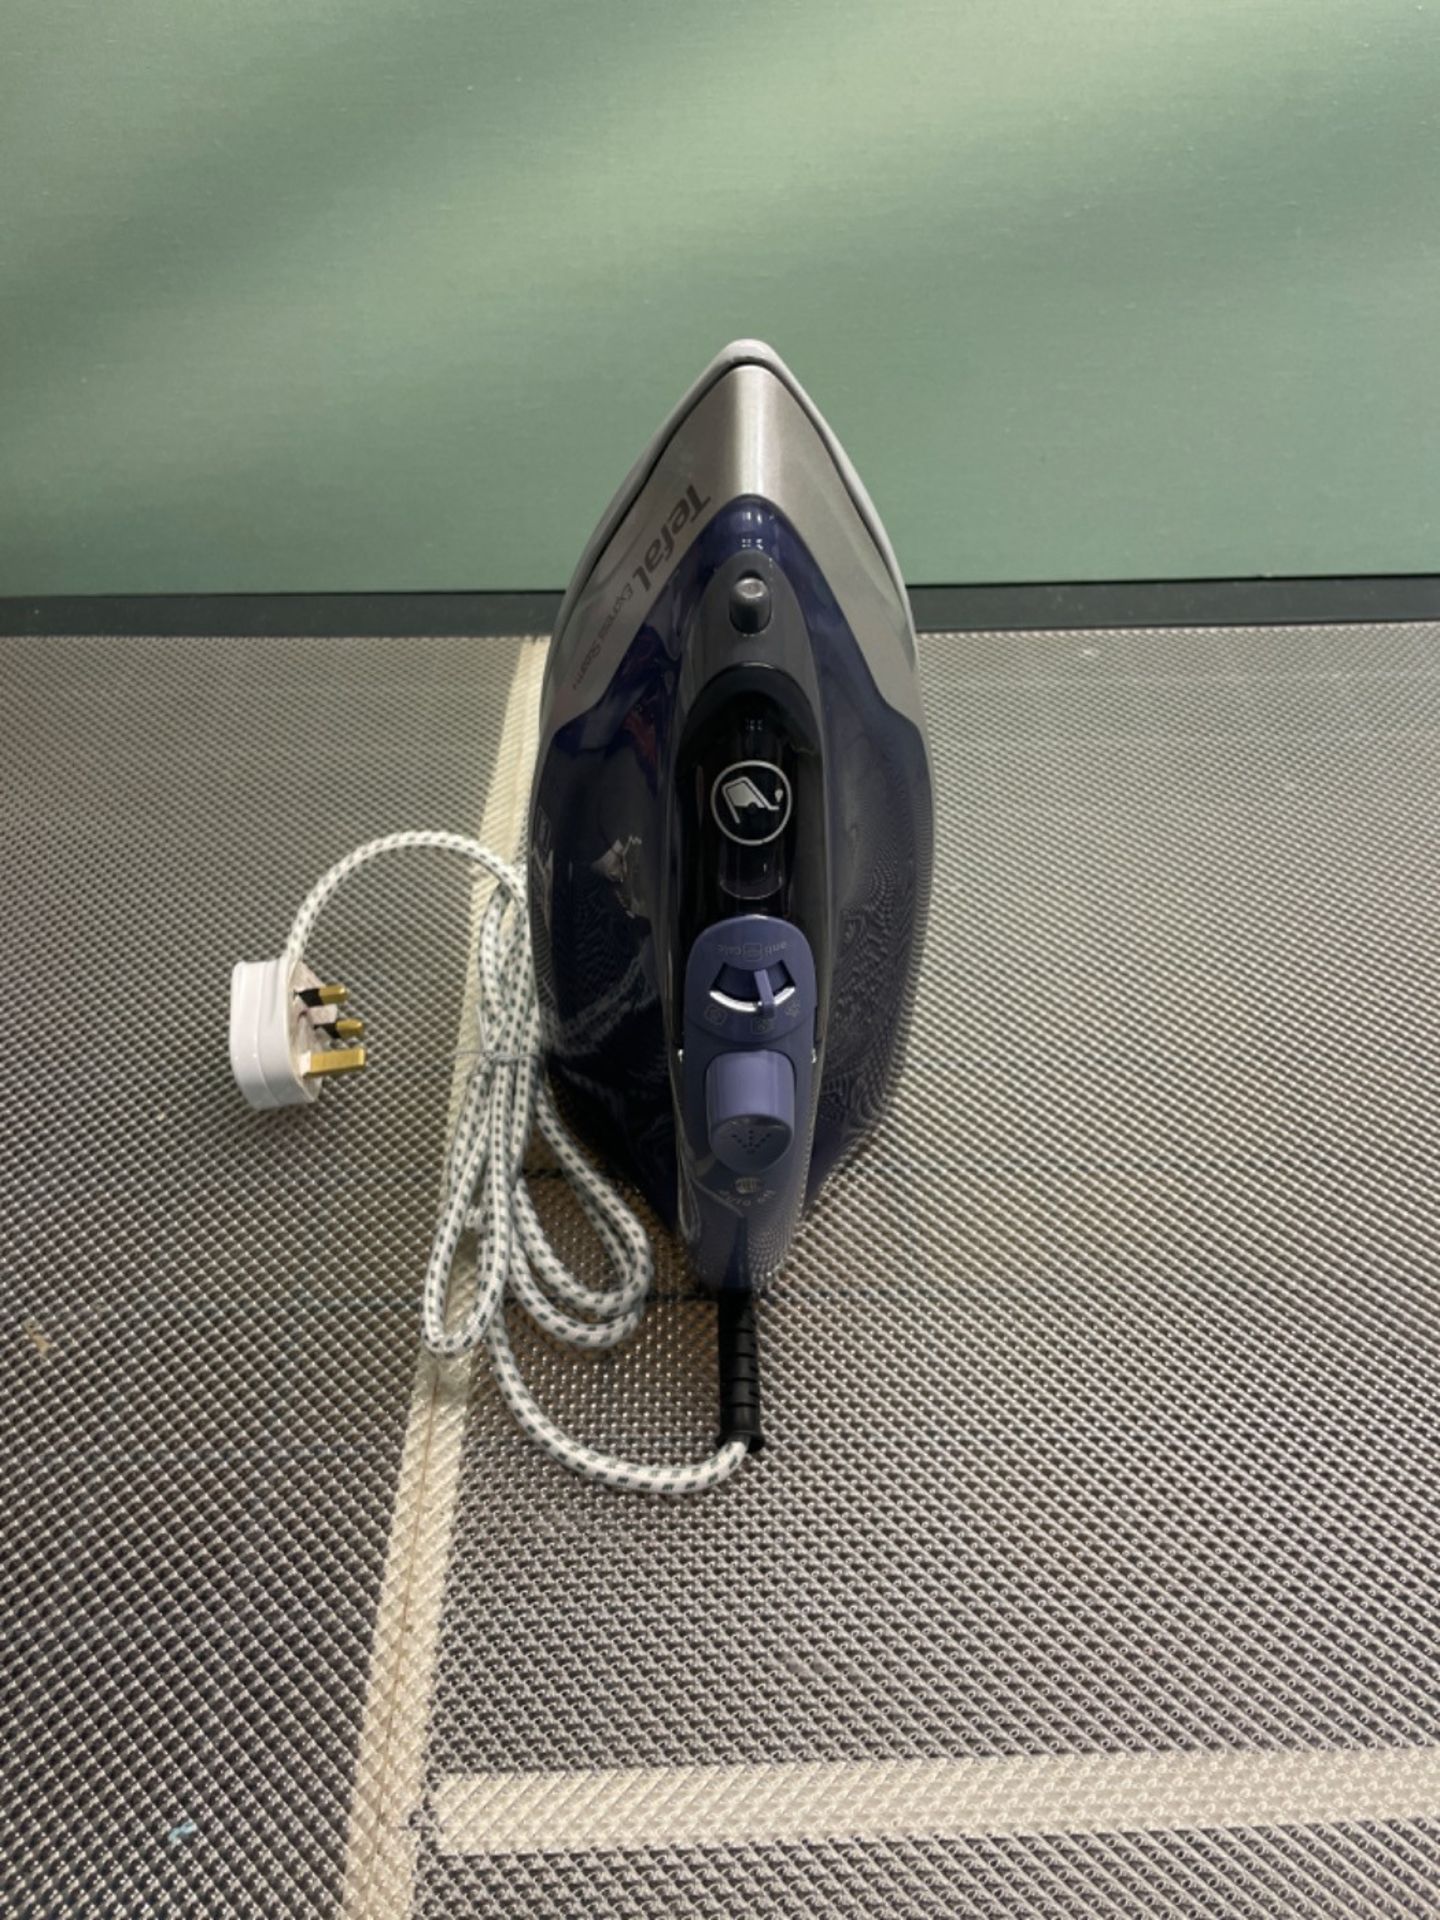 Tefal Steam Iron, Express Steam, 2600 watts, Blue and Grey, FV2882, 0.27L - Image 2 of 3